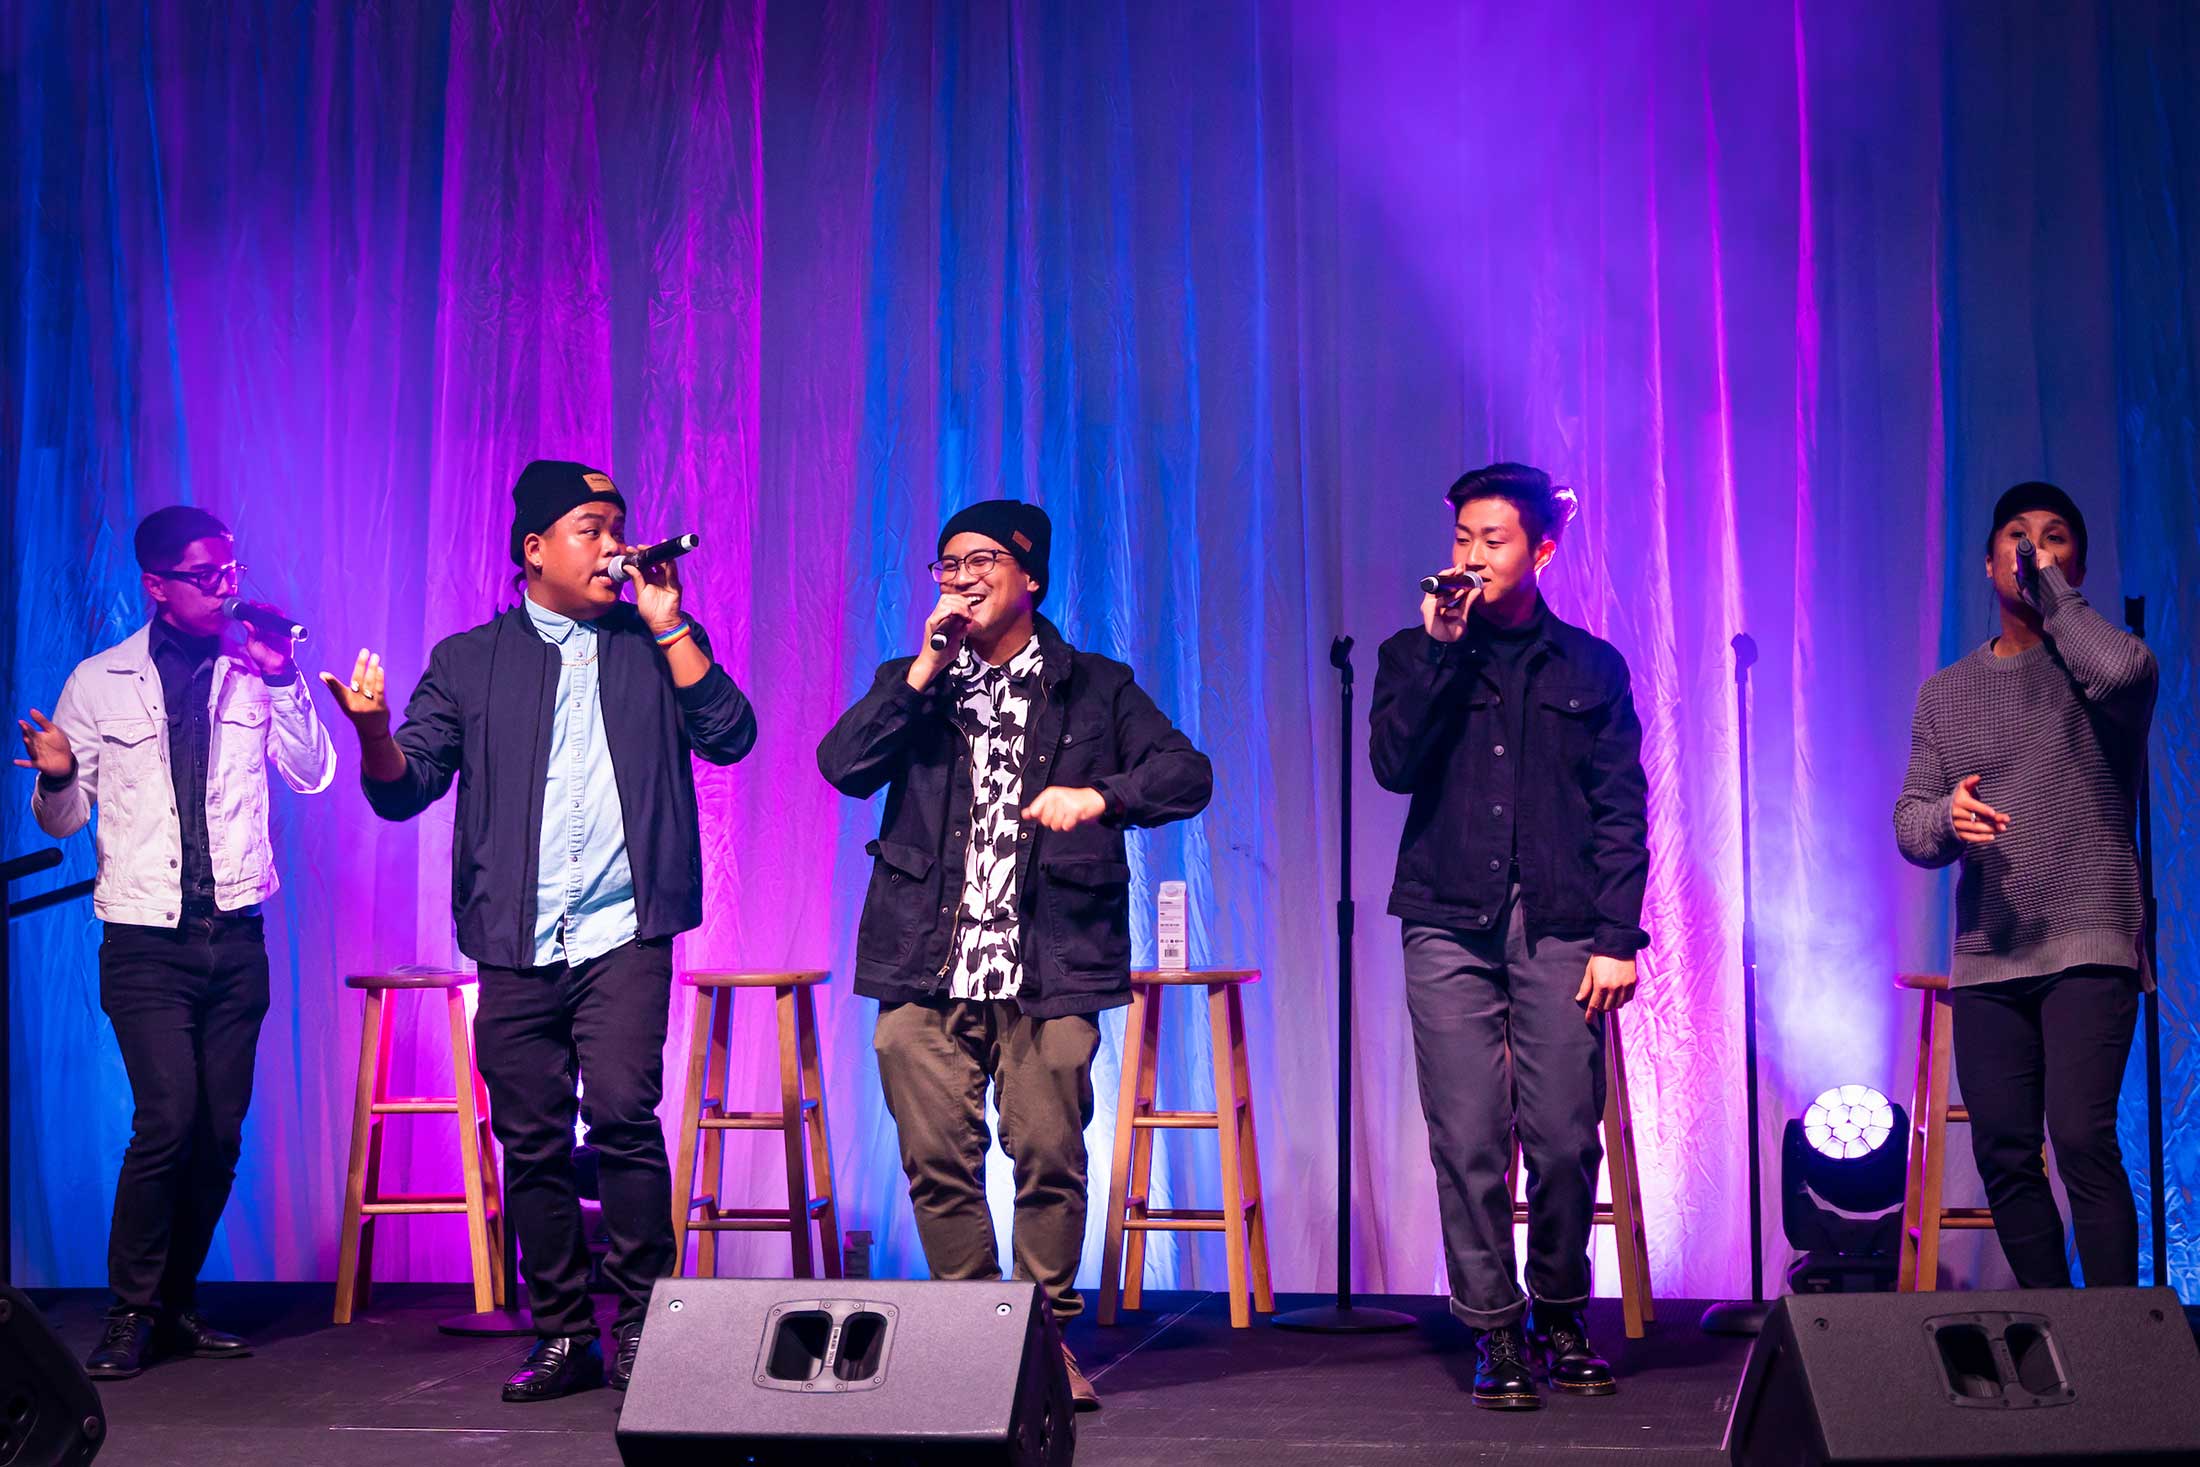 Los Angeles-based a cappella group The Filharmonic performs on stage.